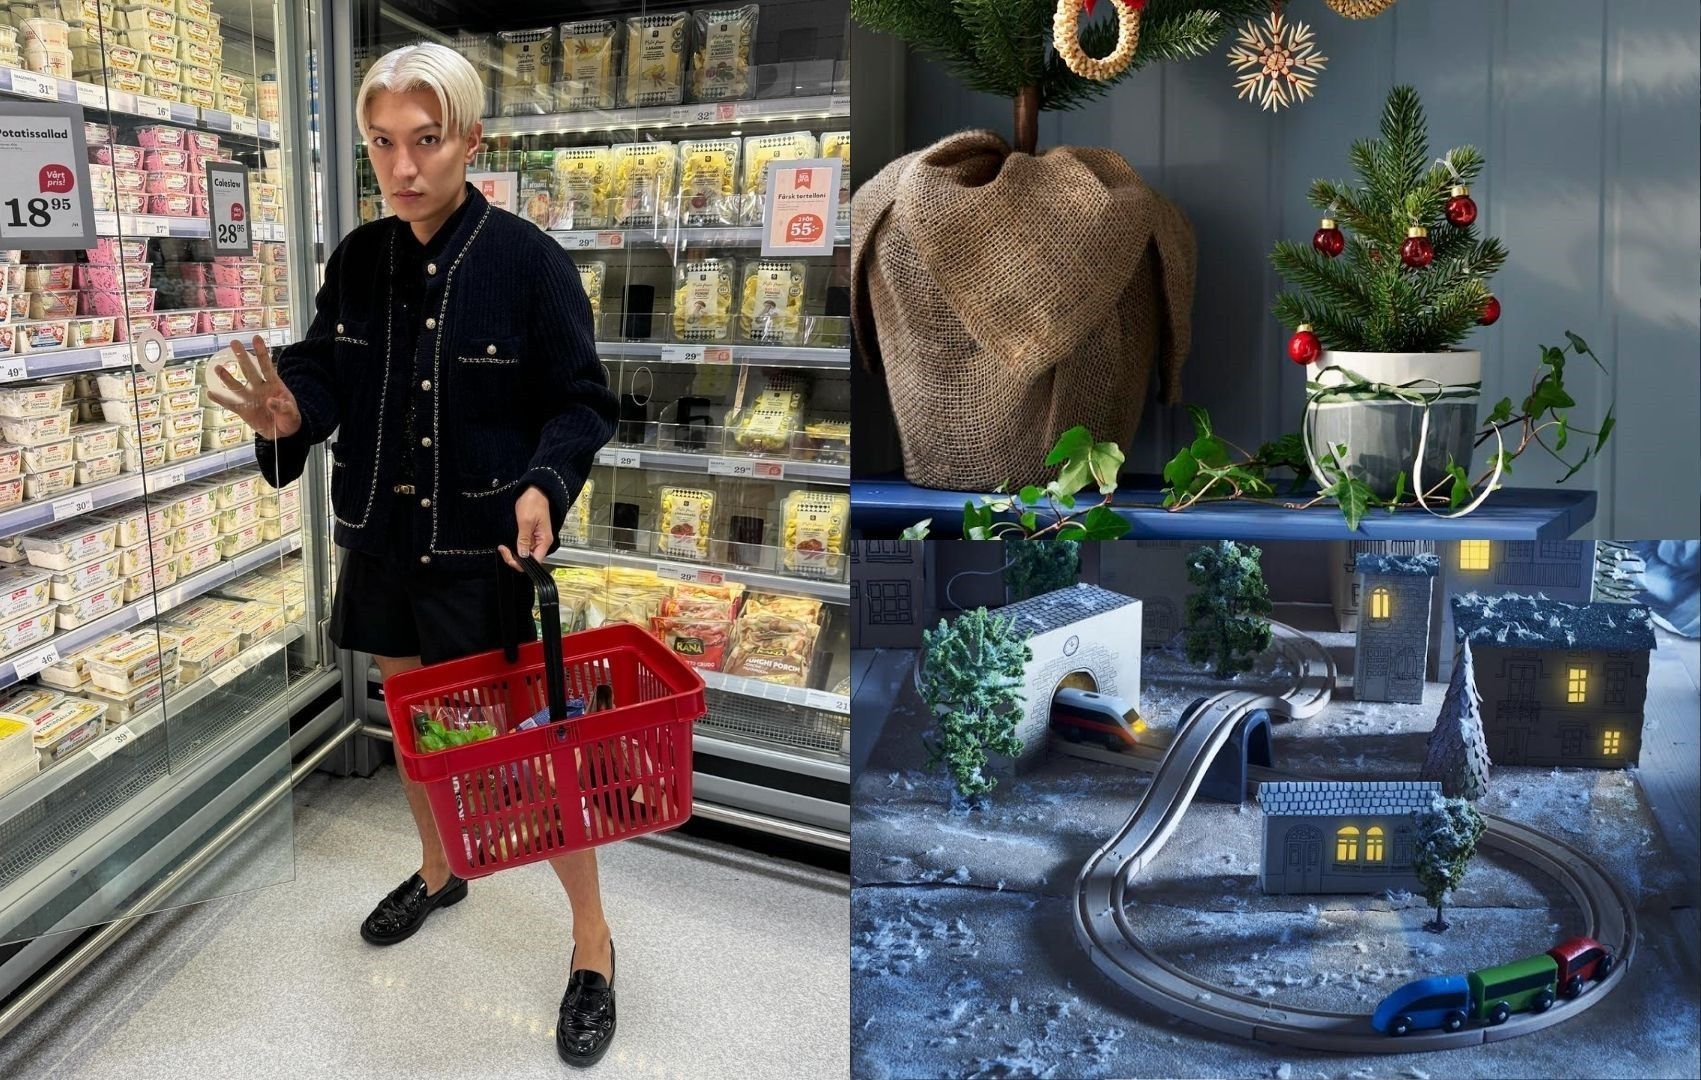 Bryanboy - This married Swedish woman is ready to go back home to